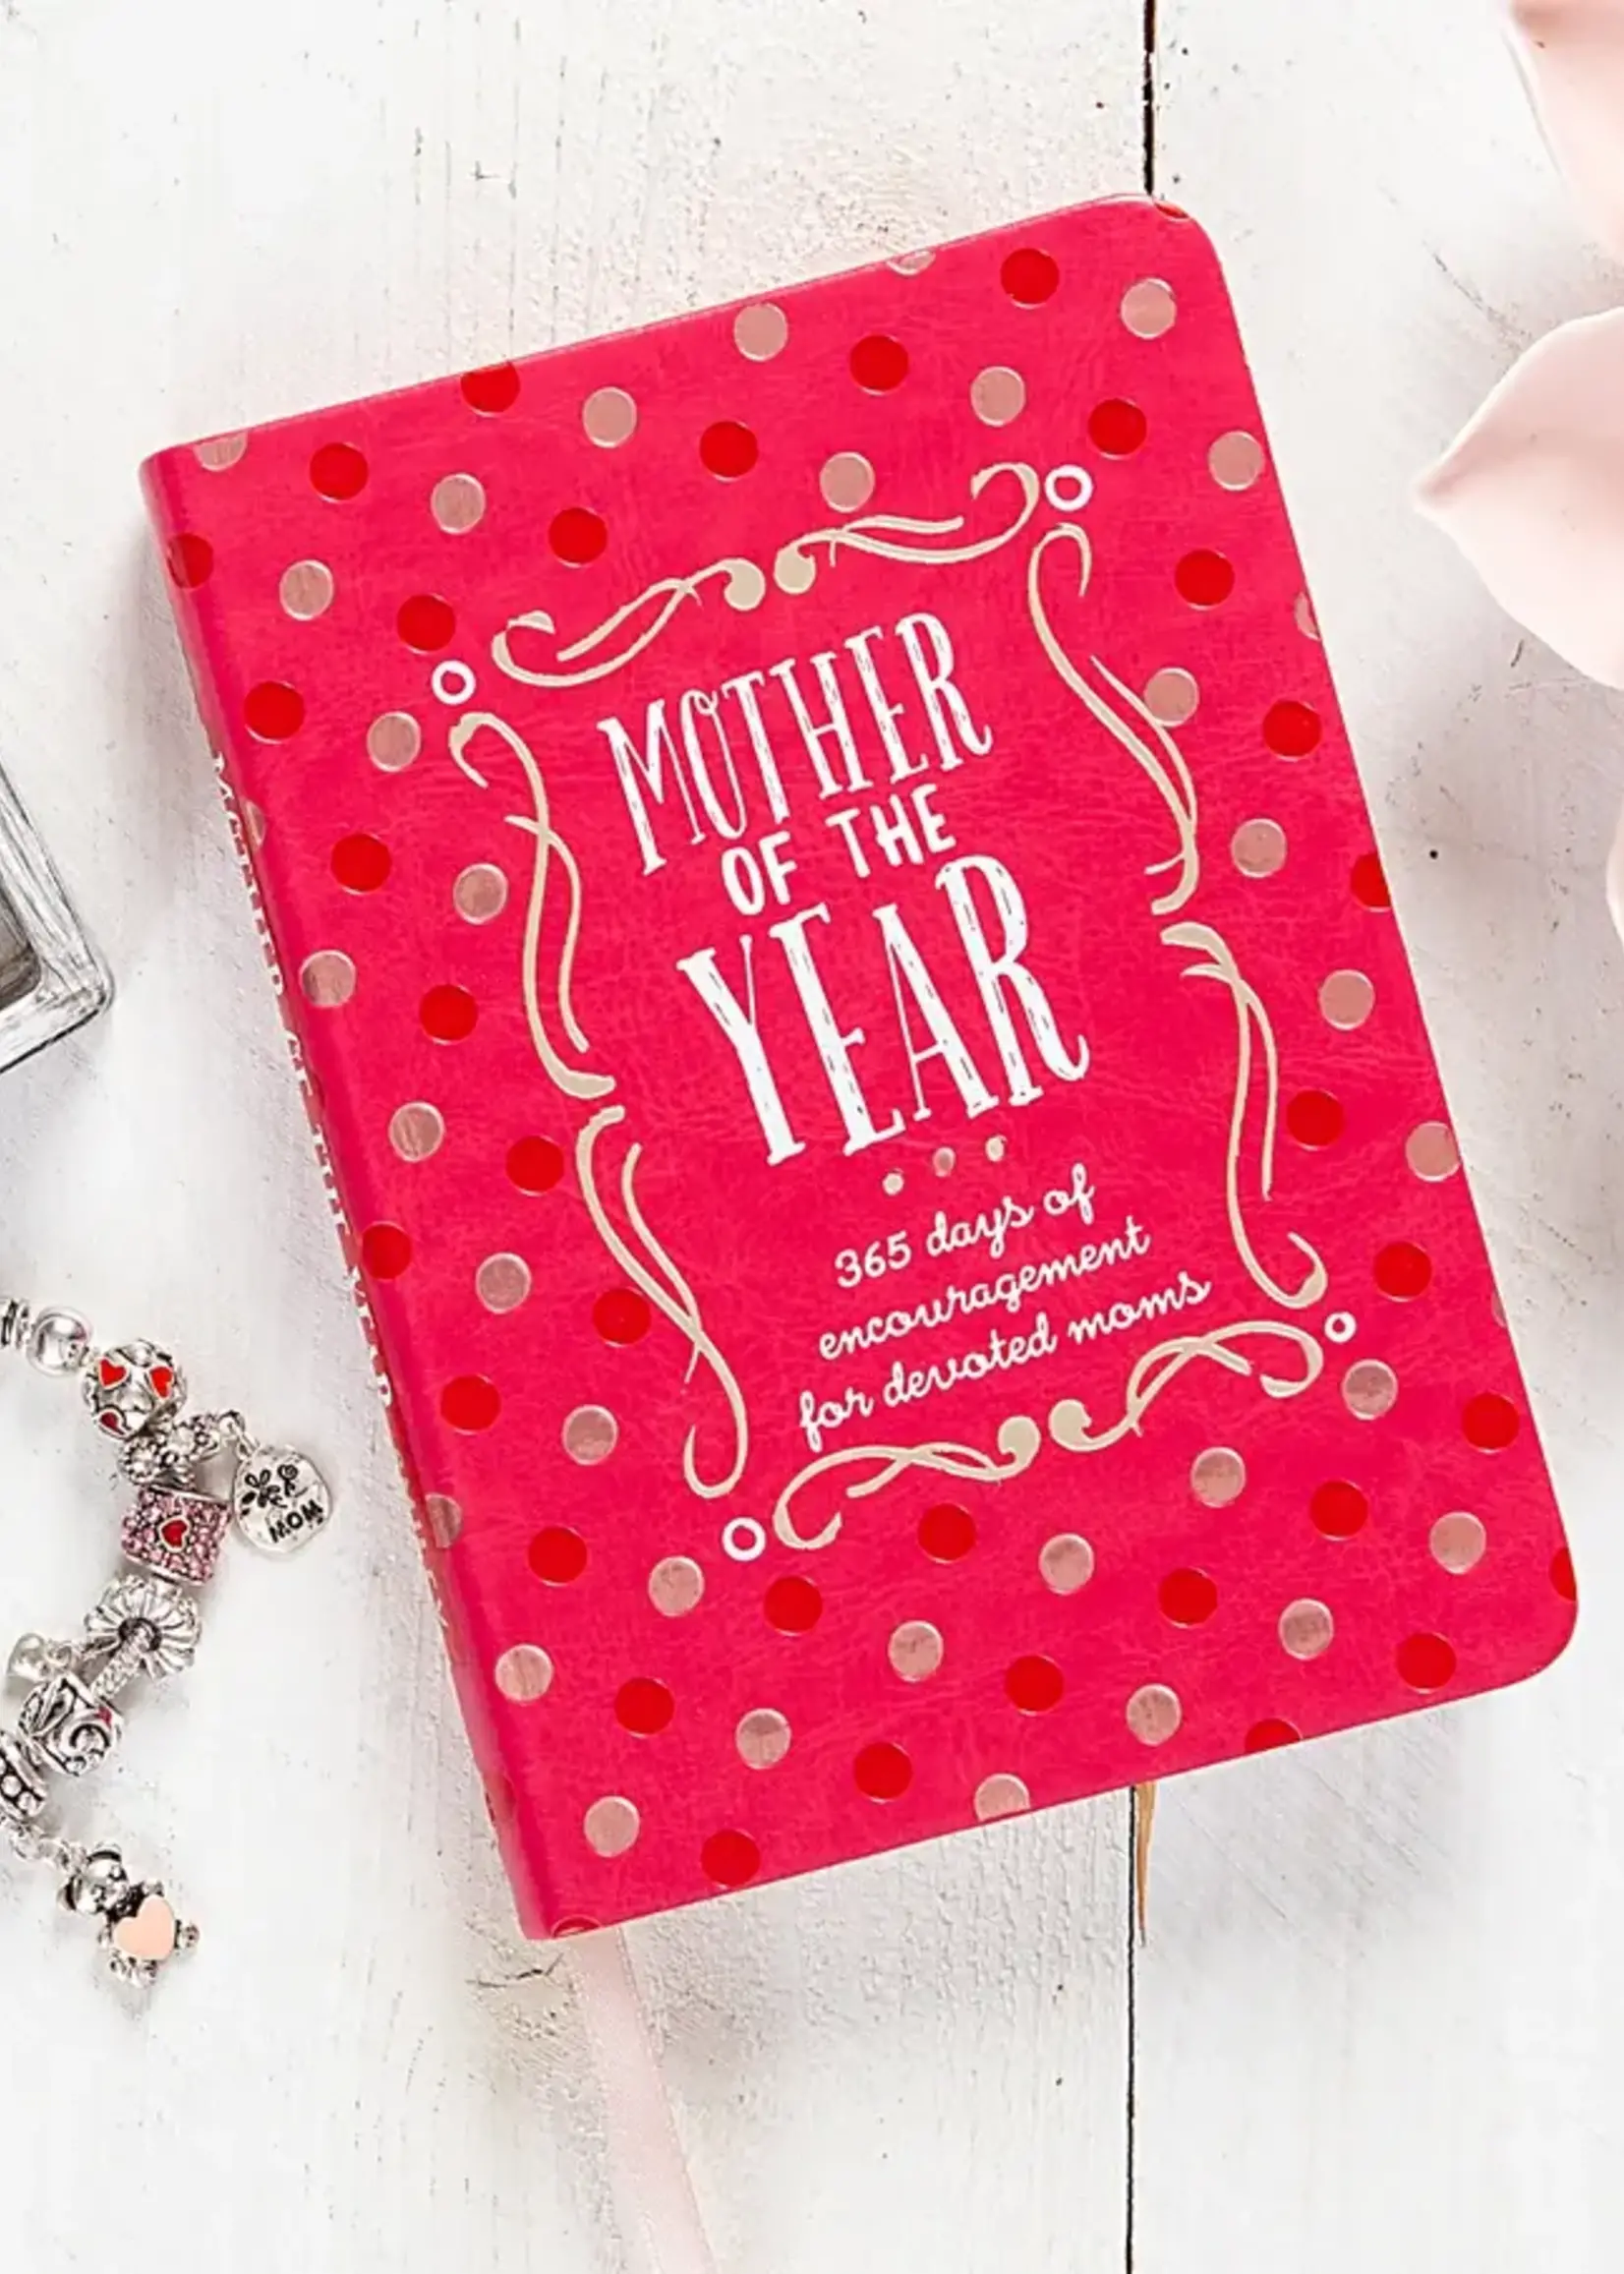 BROADSTREET MOTHER OF THE YEAR DEVOTIONAL